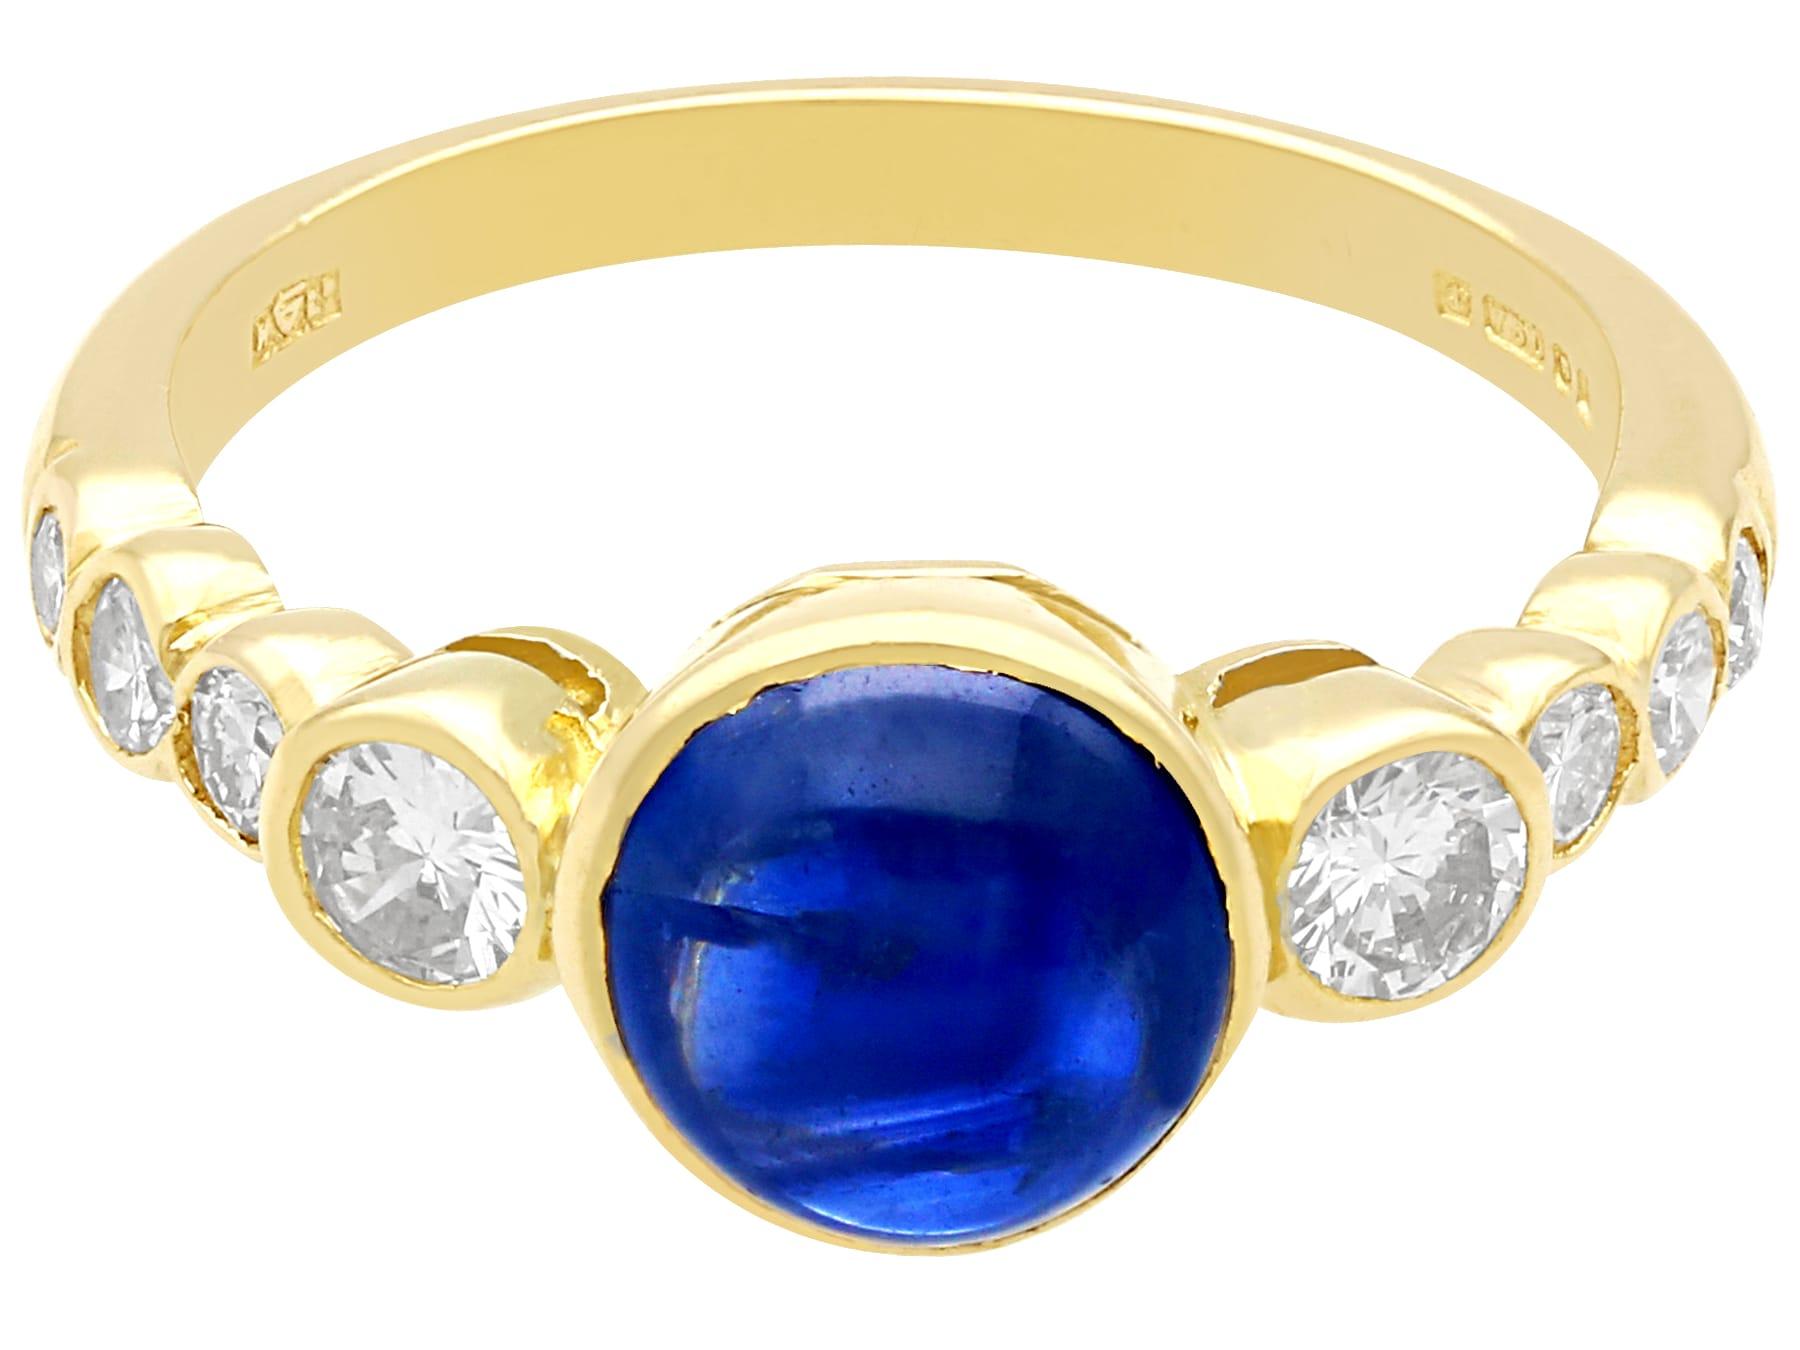 Vintage 1980s 1.74ct Cabochon Cut Sapphire and Diamond Yellow Gold Cocktail Ring In Excellent Condition For Sale In Jesmond, Newcastle Upon Tyne